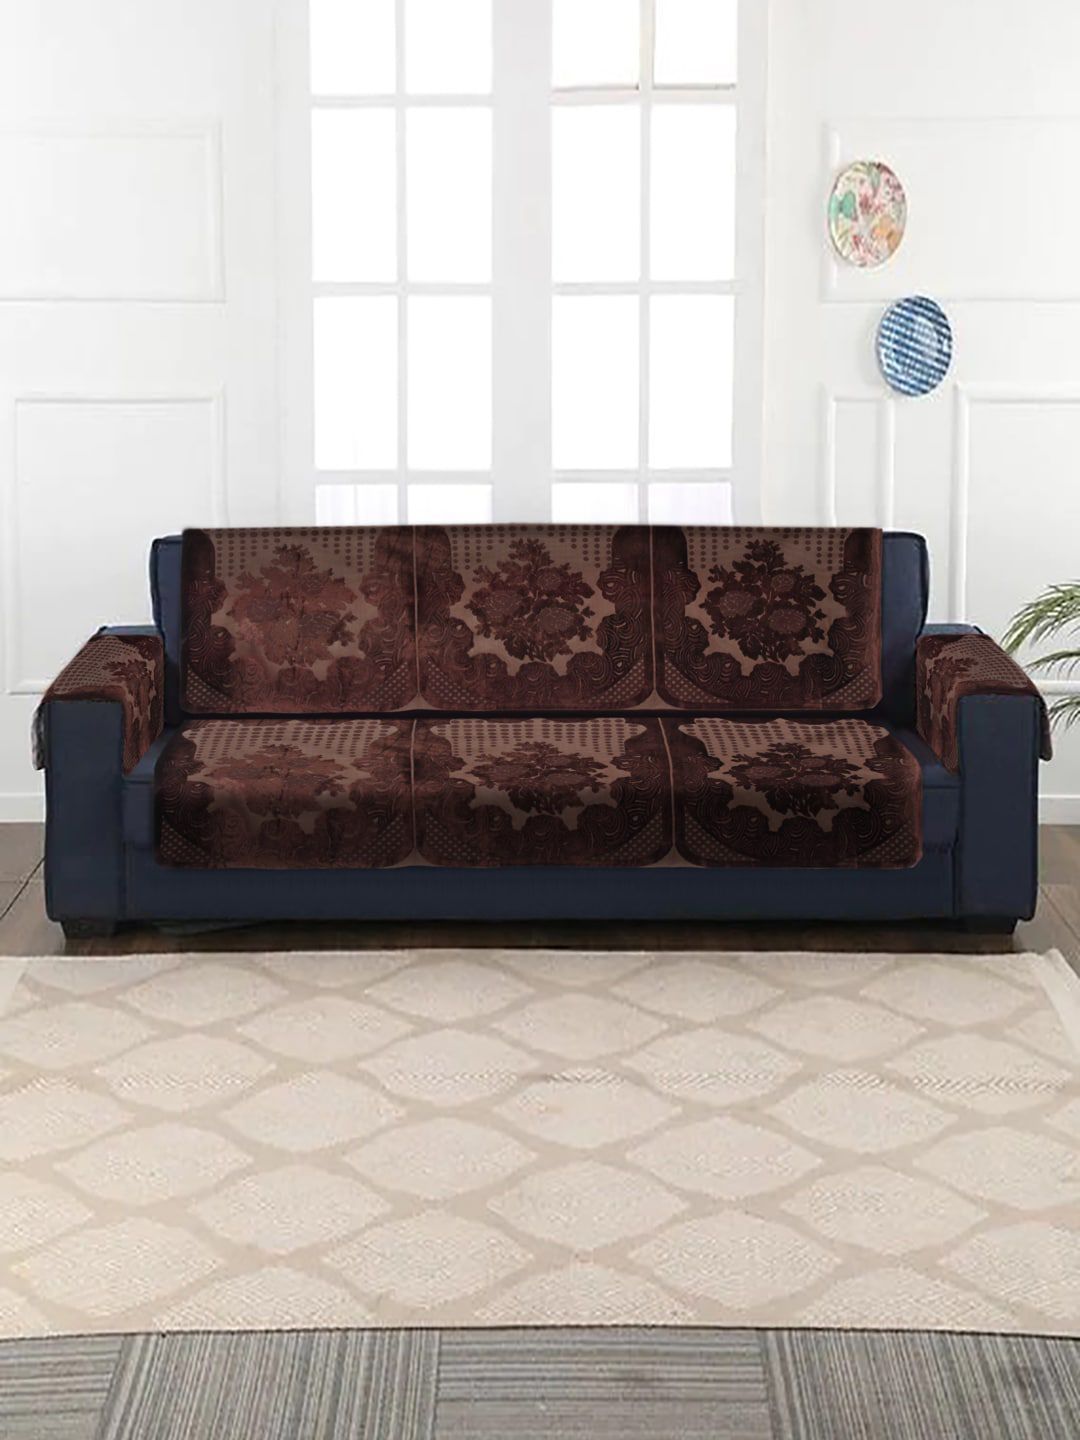 HOSTA HOMES Set of 8 Coffee Brown 3 Seater Sofa Cover with Arm Rest Price in India